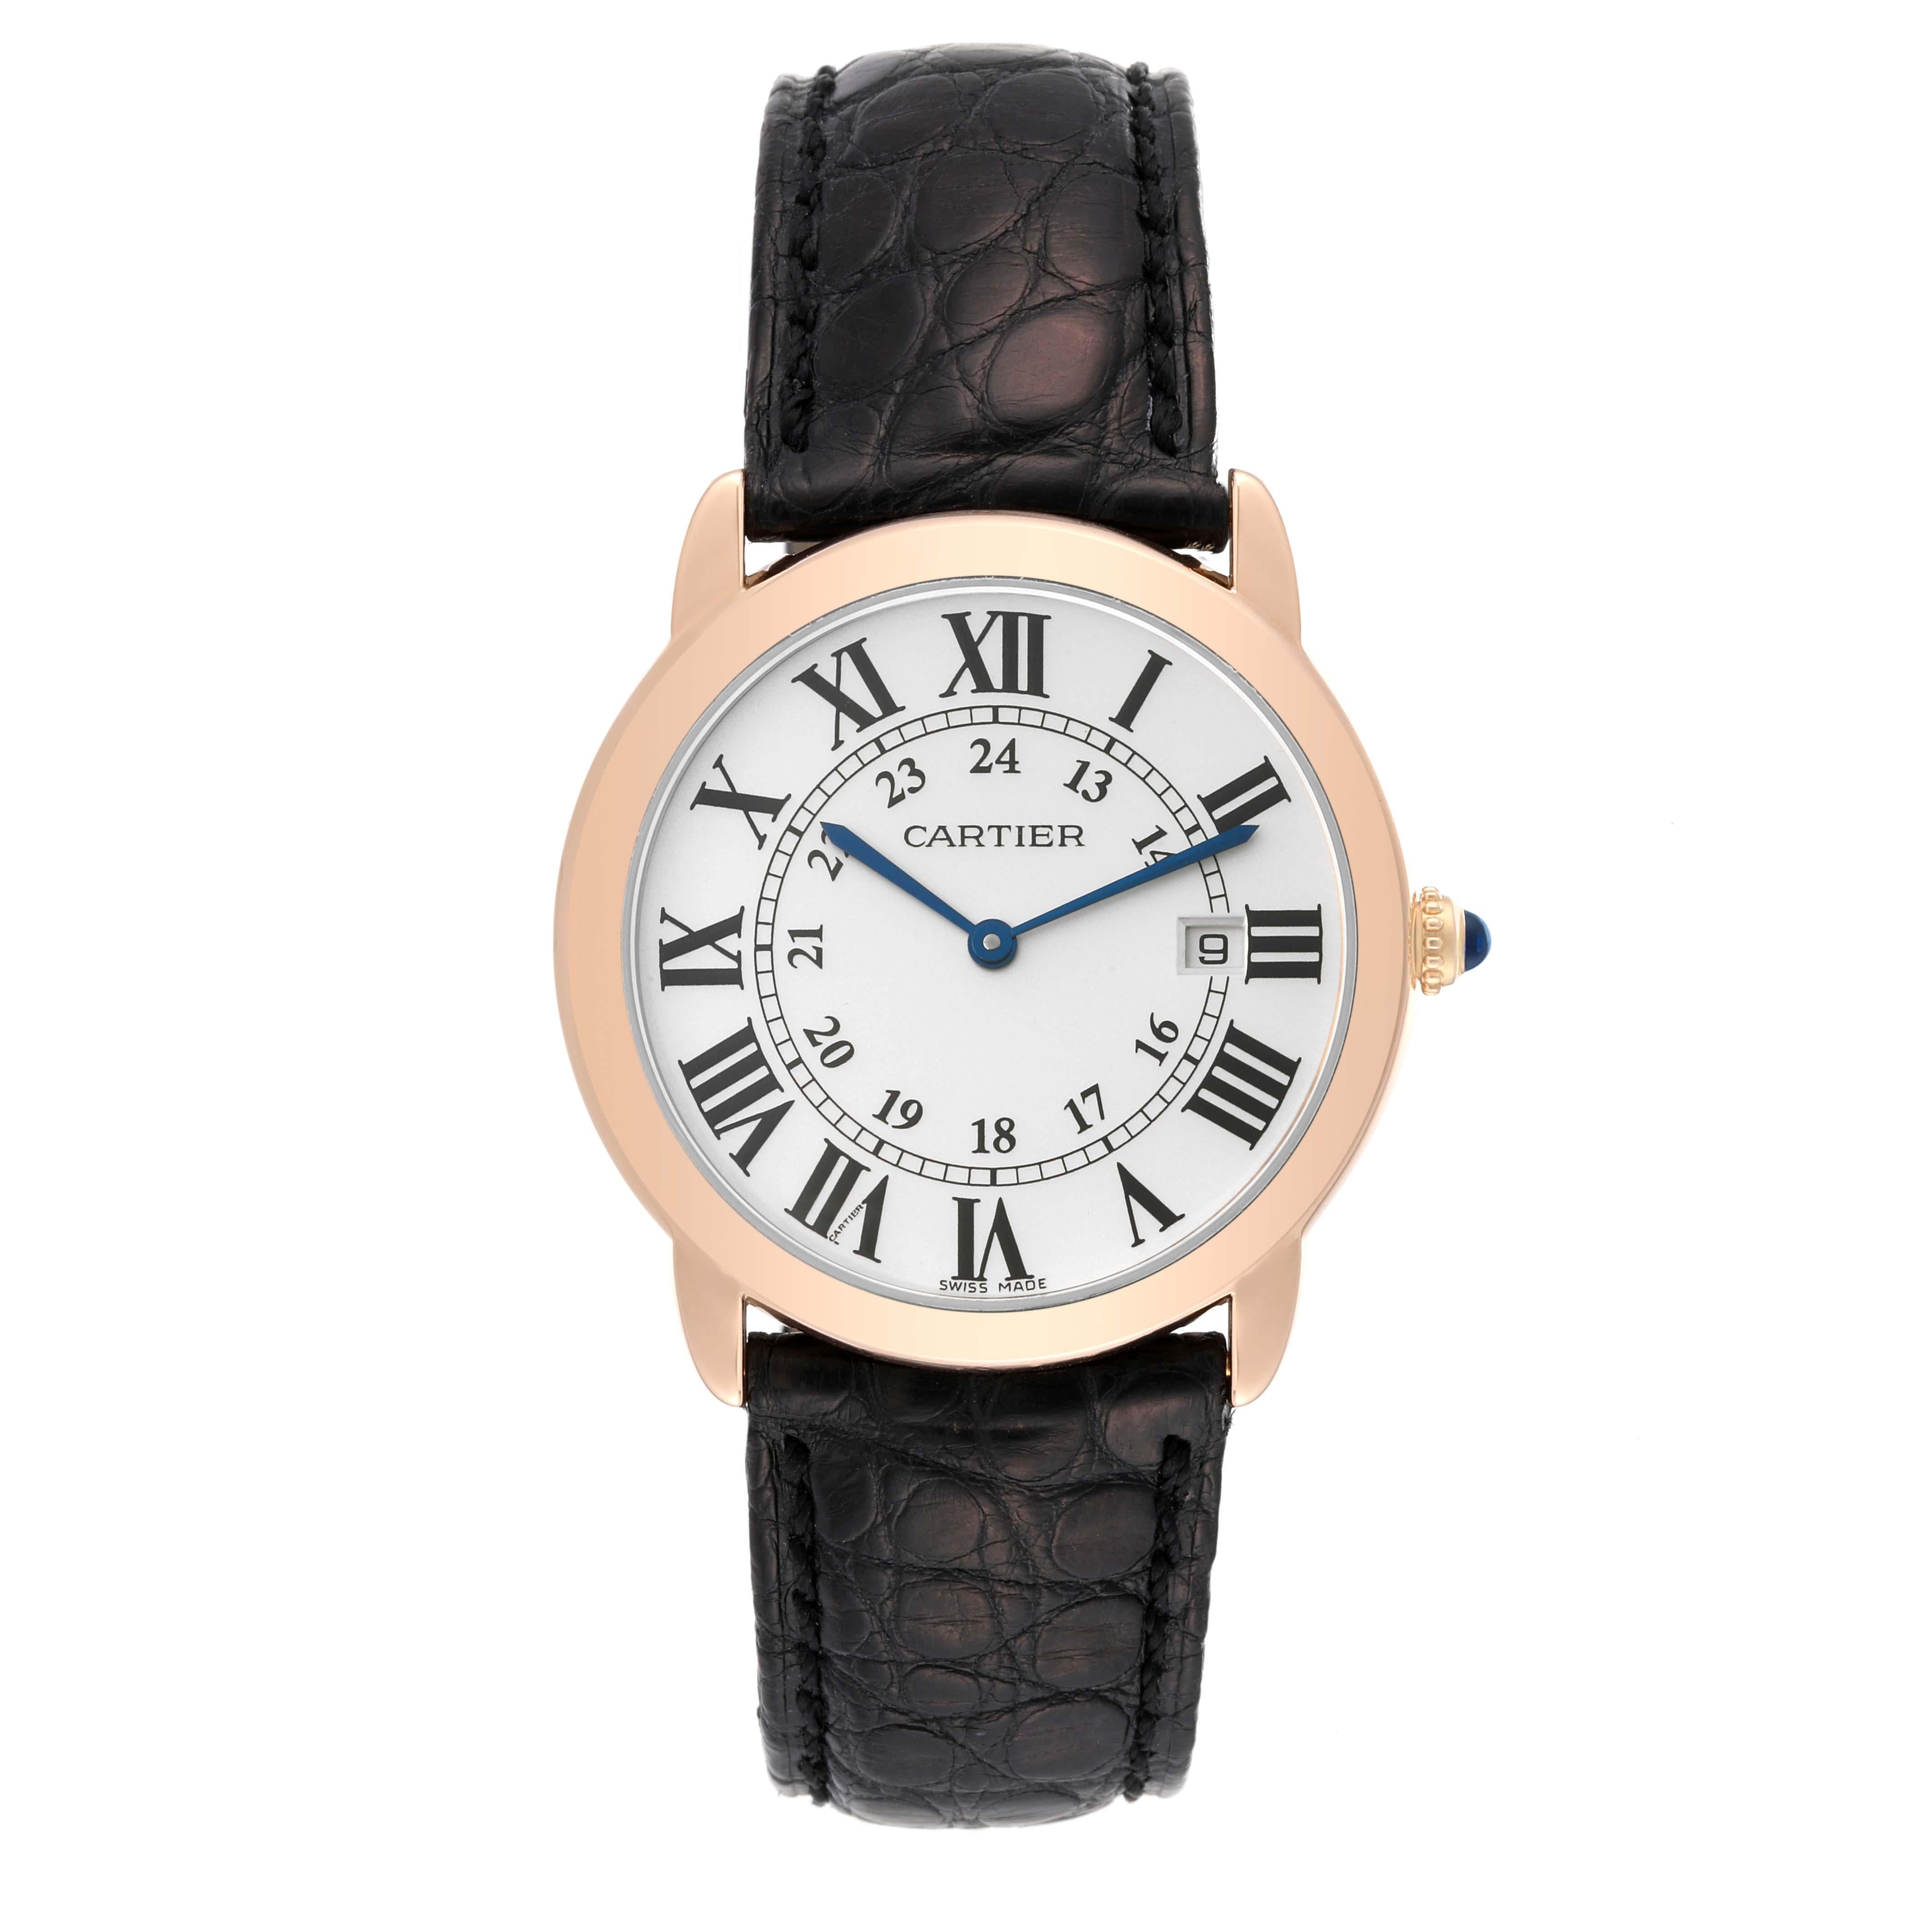 Cartier Ronde Solo Large Rose Gold Steel Mens Watch W6701008 Papers. Quartz movement. 18K rose gold case 36.0 mm in diameter. Stainless steel caseback. Circular grained crown set with a blue spinel cabochon. . Scratch resistant sapphire crystal.